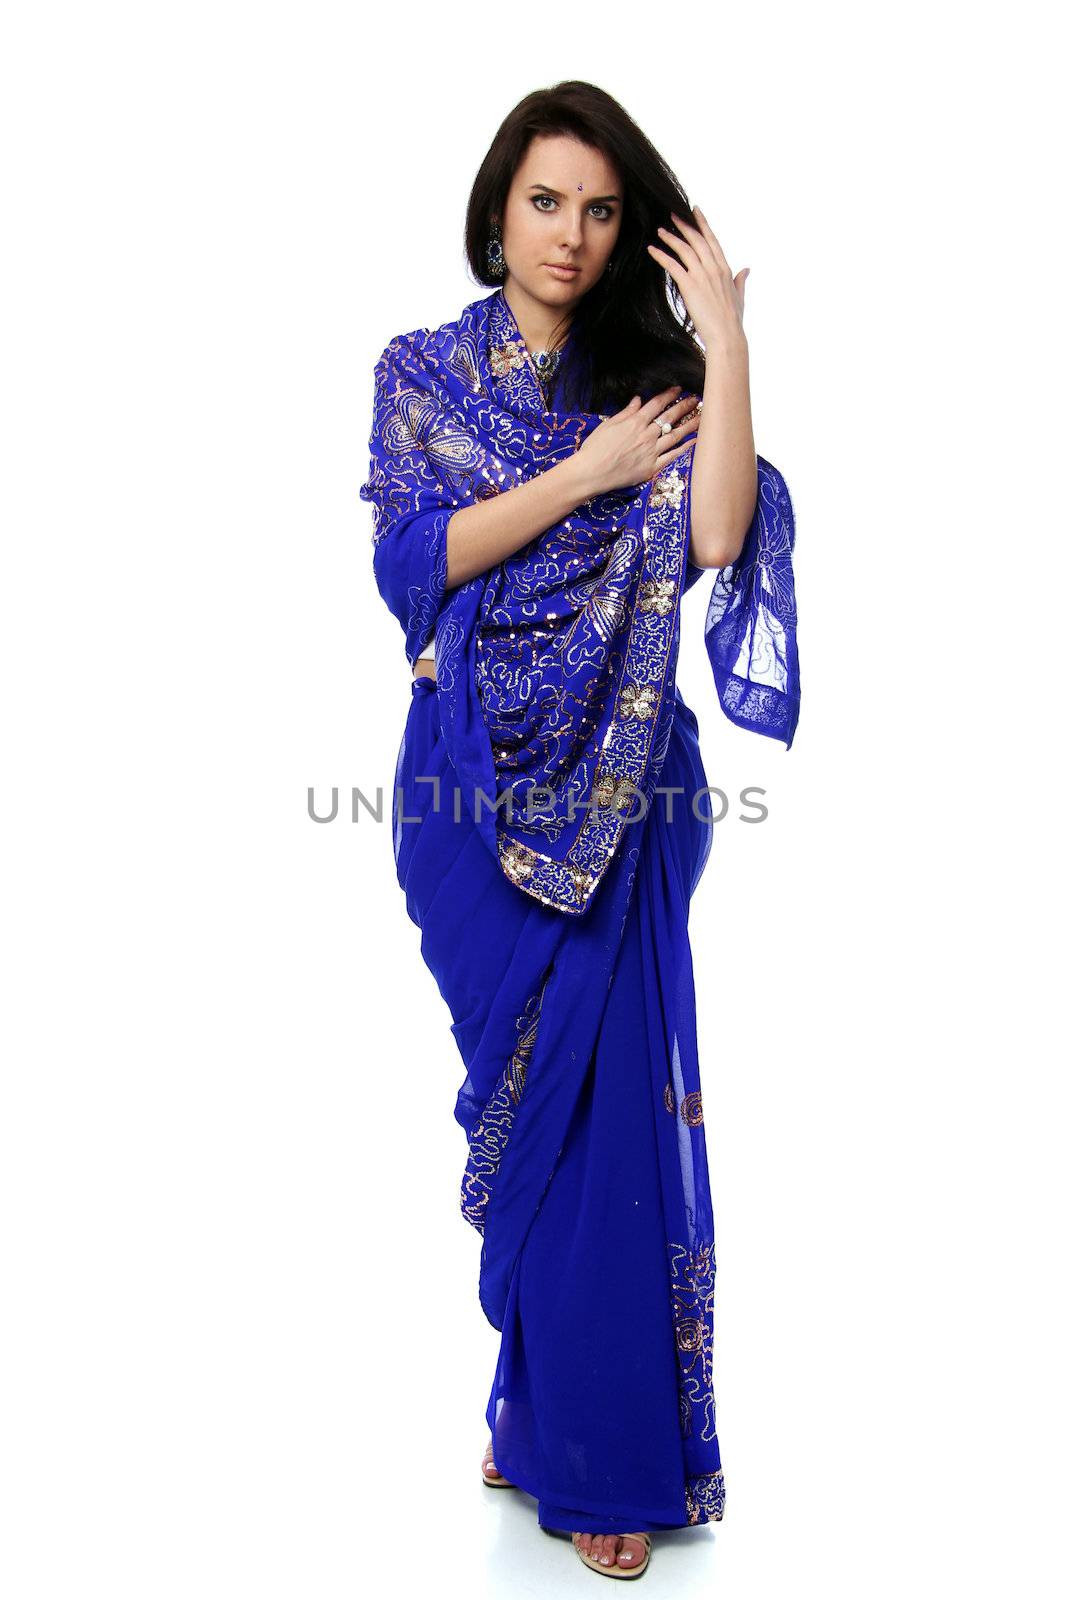 Young pretty woman in indian sari dress by andersonrise